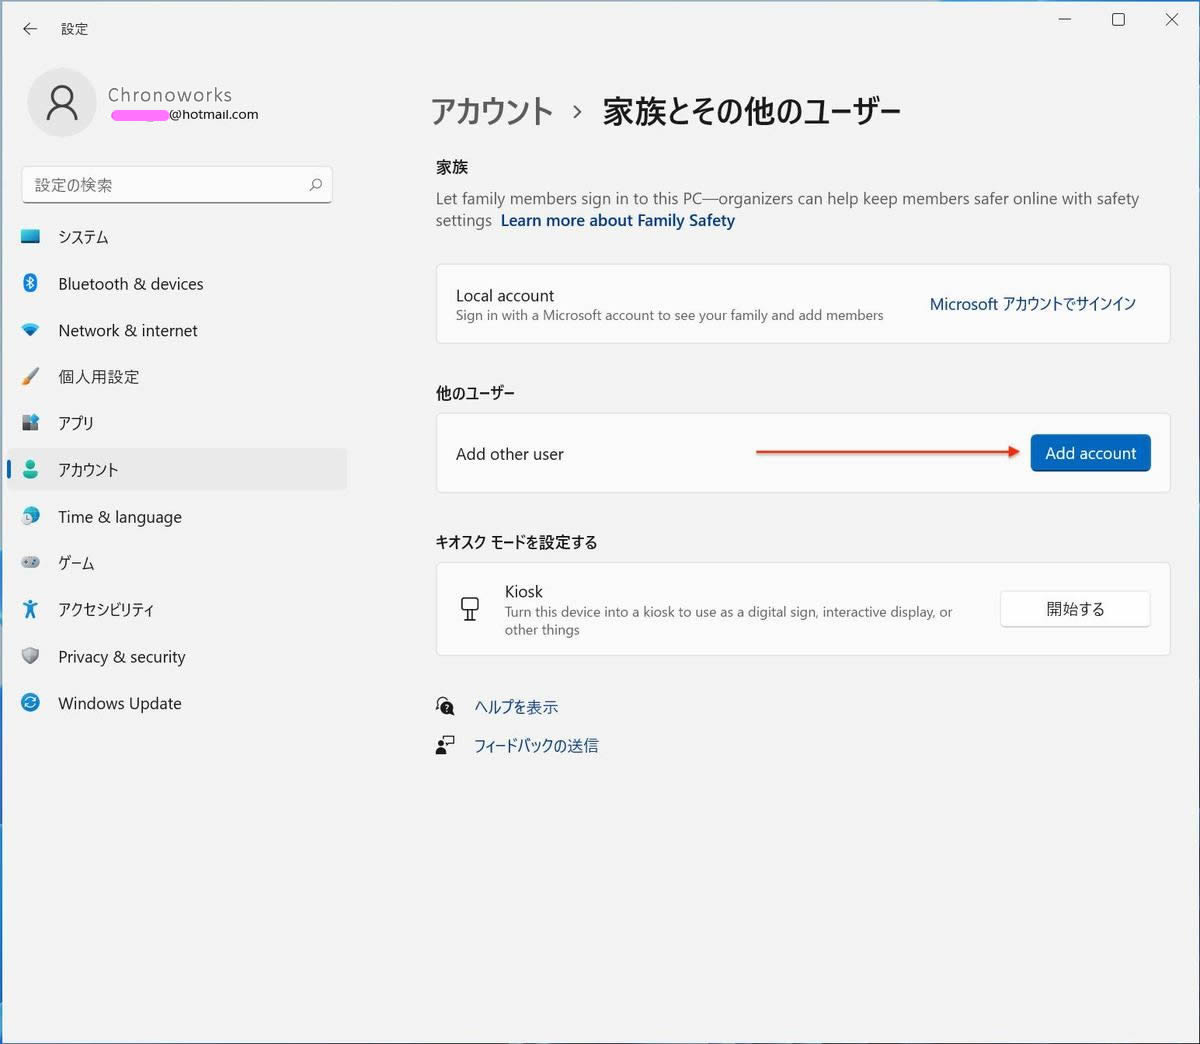 「Add other user」→「Add account」を選択